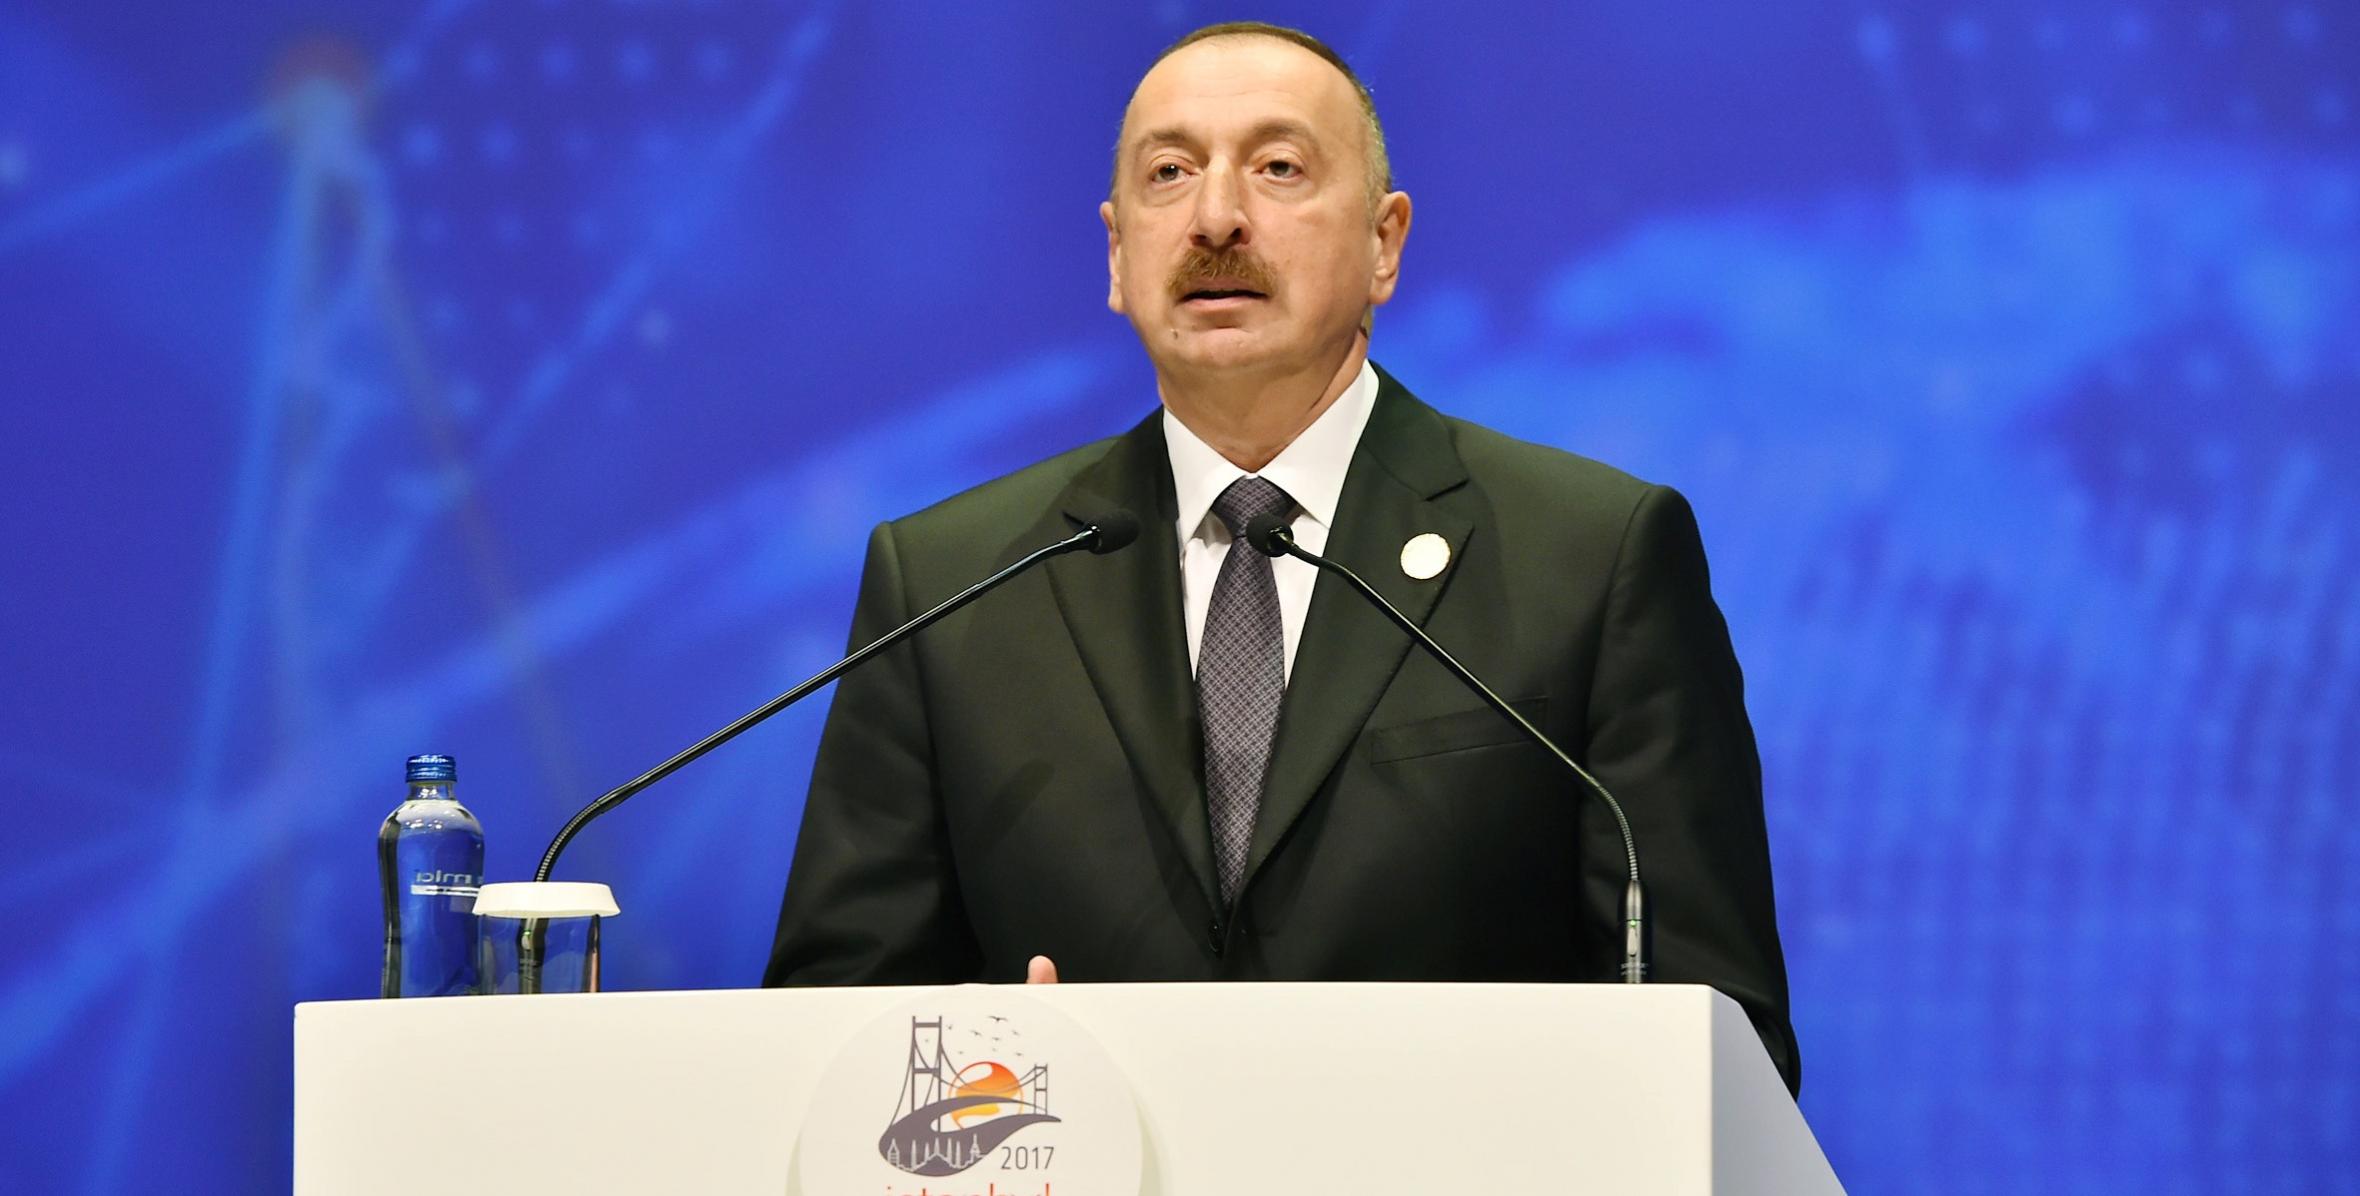 Speech by Ilham Aliyev at the Presidential Ceremony of the 22nd World Petroleum Congress